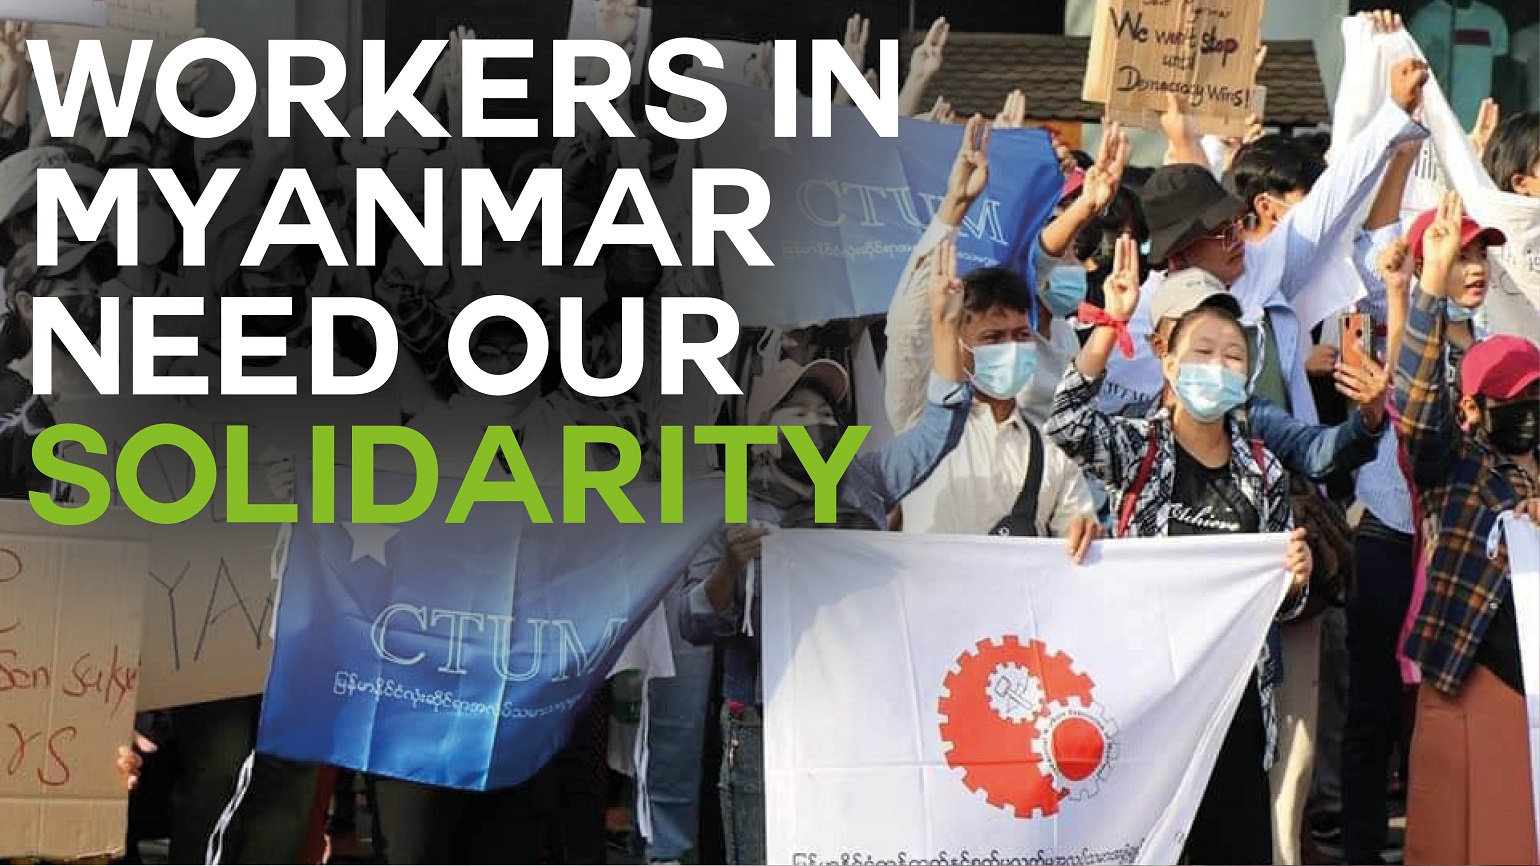 WATCH: How you can support the workers’ struggle in Myanmar – with Jay Kerr and Khaing Zar Aung